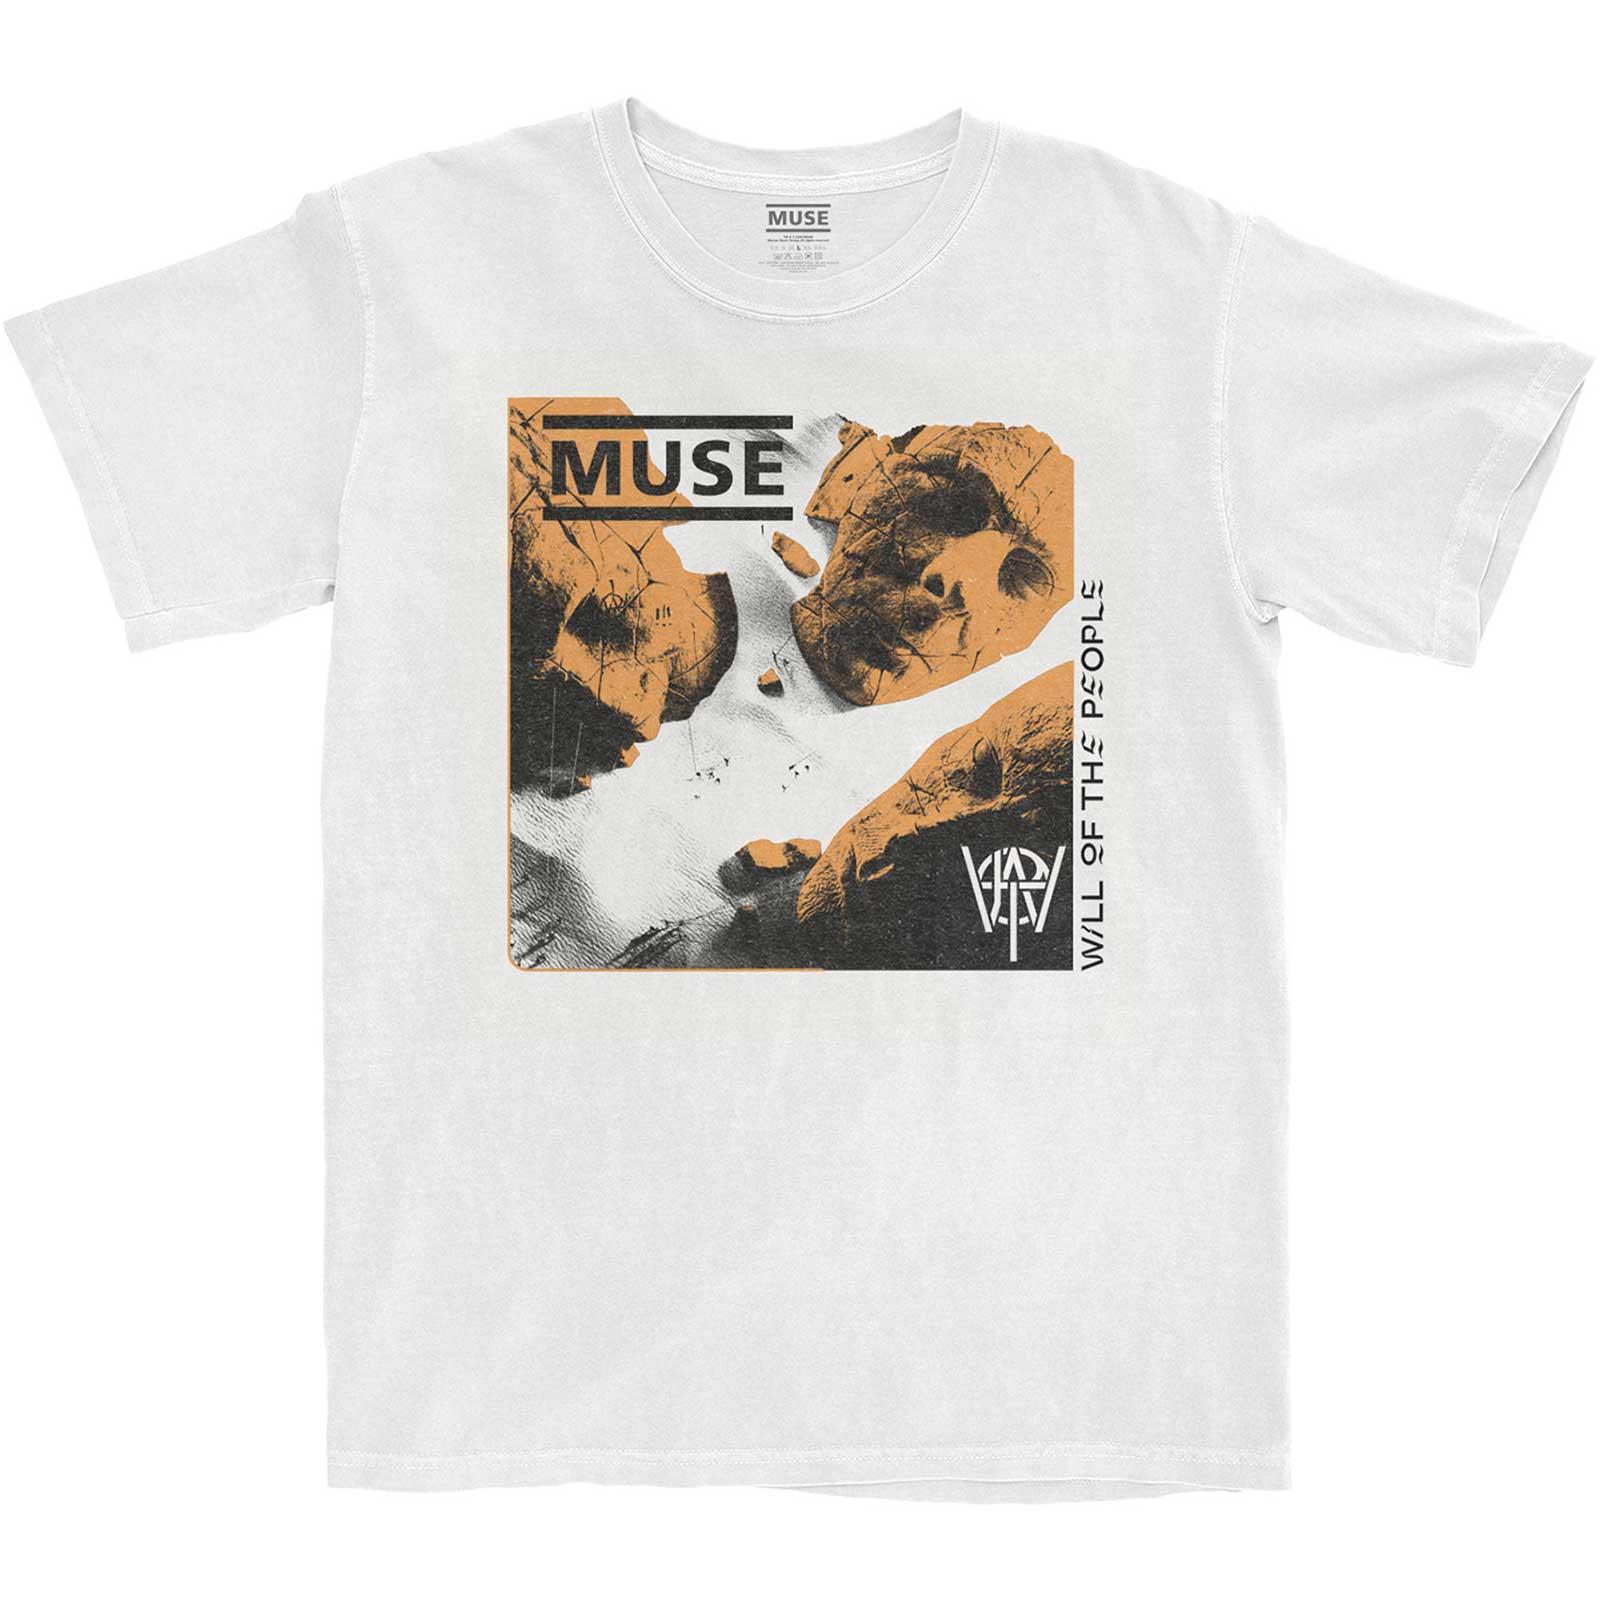 Muse Unisex Adult Will Of The People Cotton T-Shirt (White) (XL)